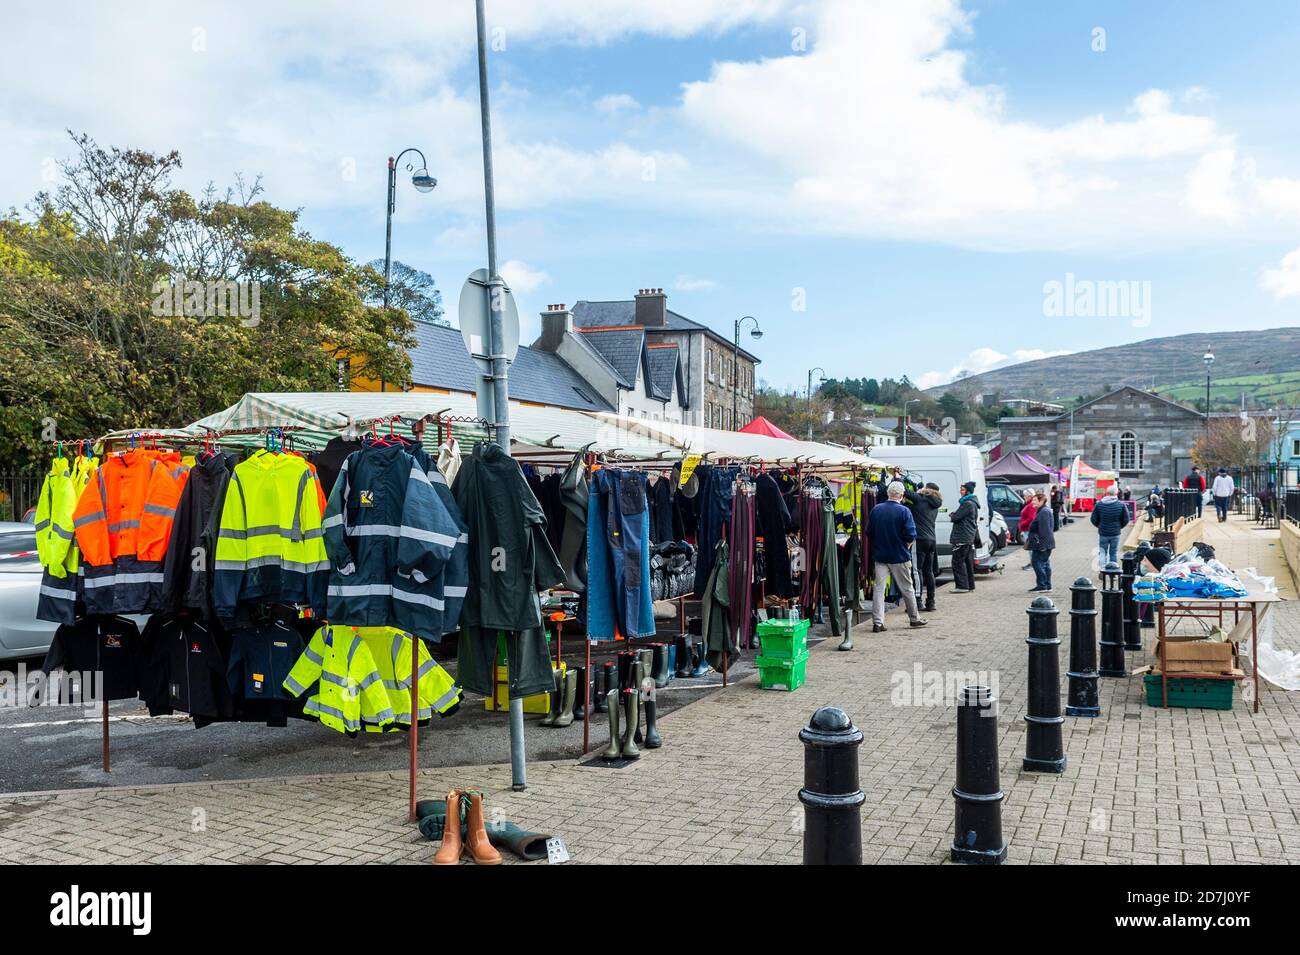 Bantry, West Cork, Ireland. 23rd Oct, 2020. Bantry Friday Market is operating today and is quieter than usual. However, despite Cork County Council stating only stalls selling essential items such as food, many stalls appeared to be selling non-essential items. Credit: AG News/Alamy Live News Stock Photo